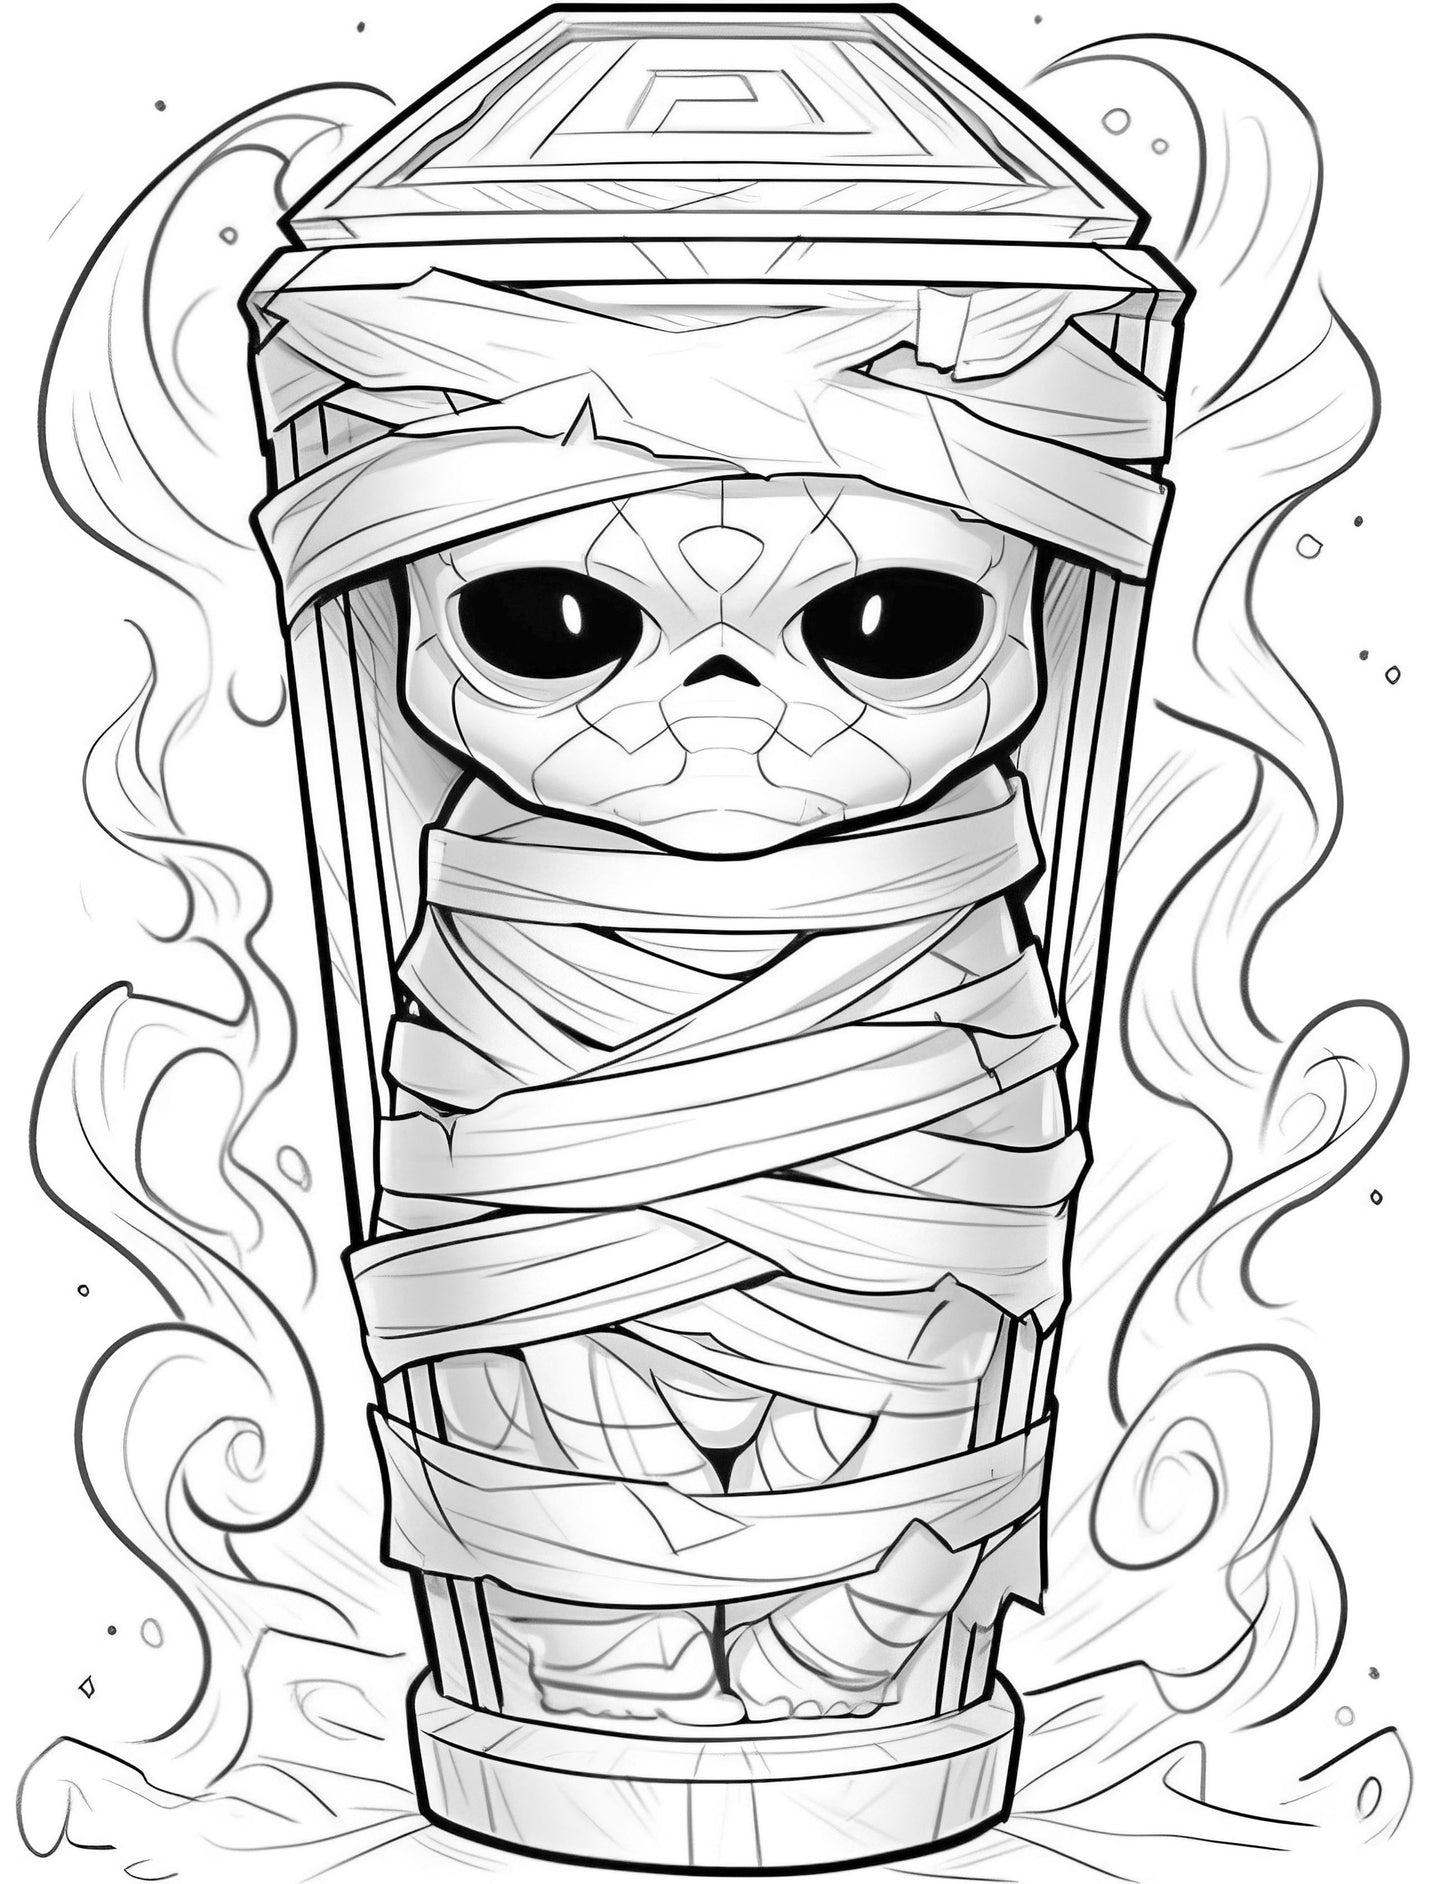 25 Creepy Kawaii Grayscale Coloring Pages - Halloween Coloring - Instant Download - Printable Dark/Light